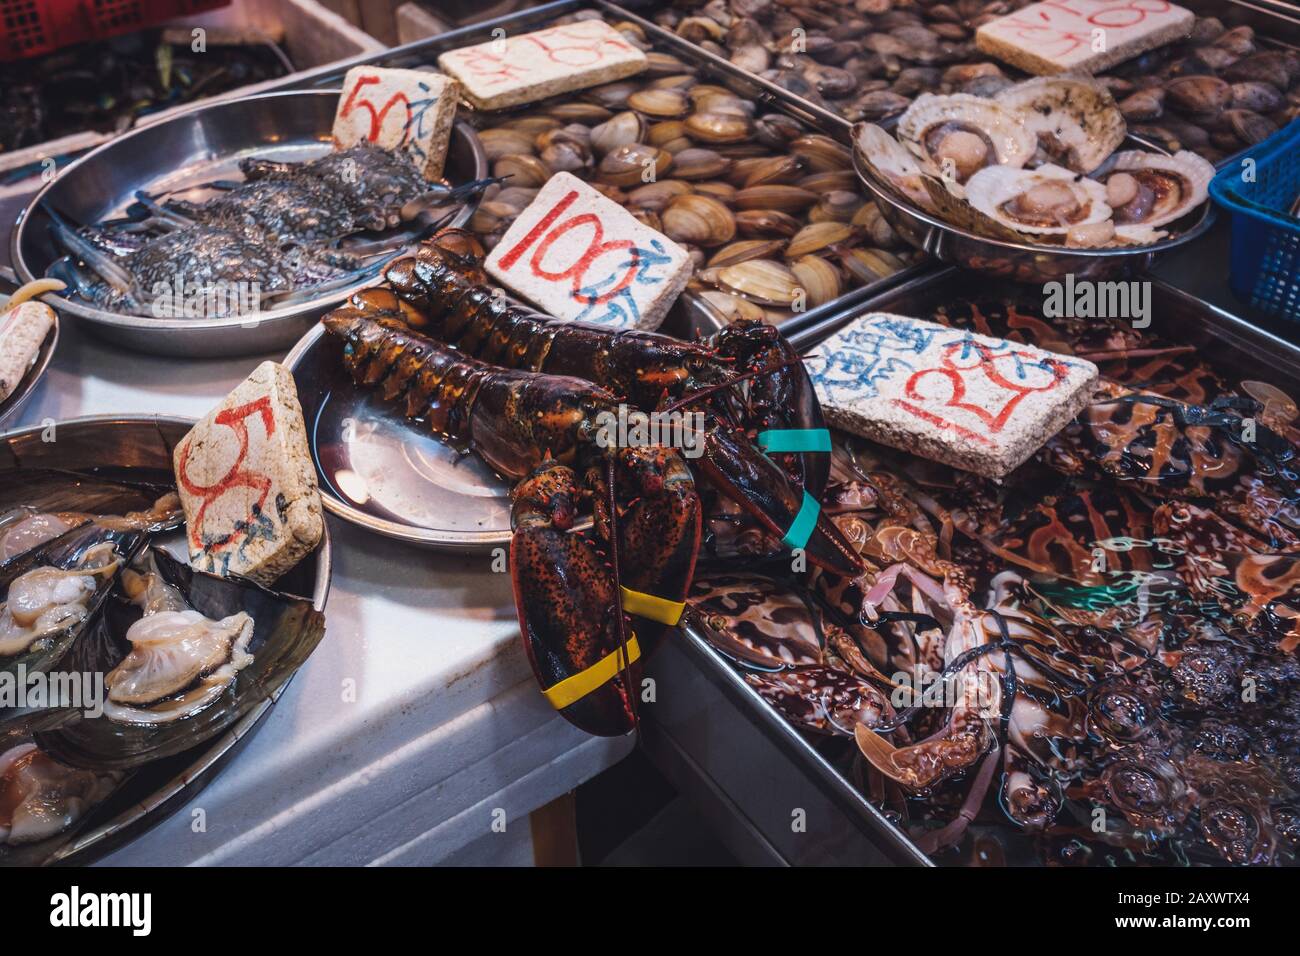 Lobster , crayfish and mussels on seafood market in Hong Kong, Stock Photo